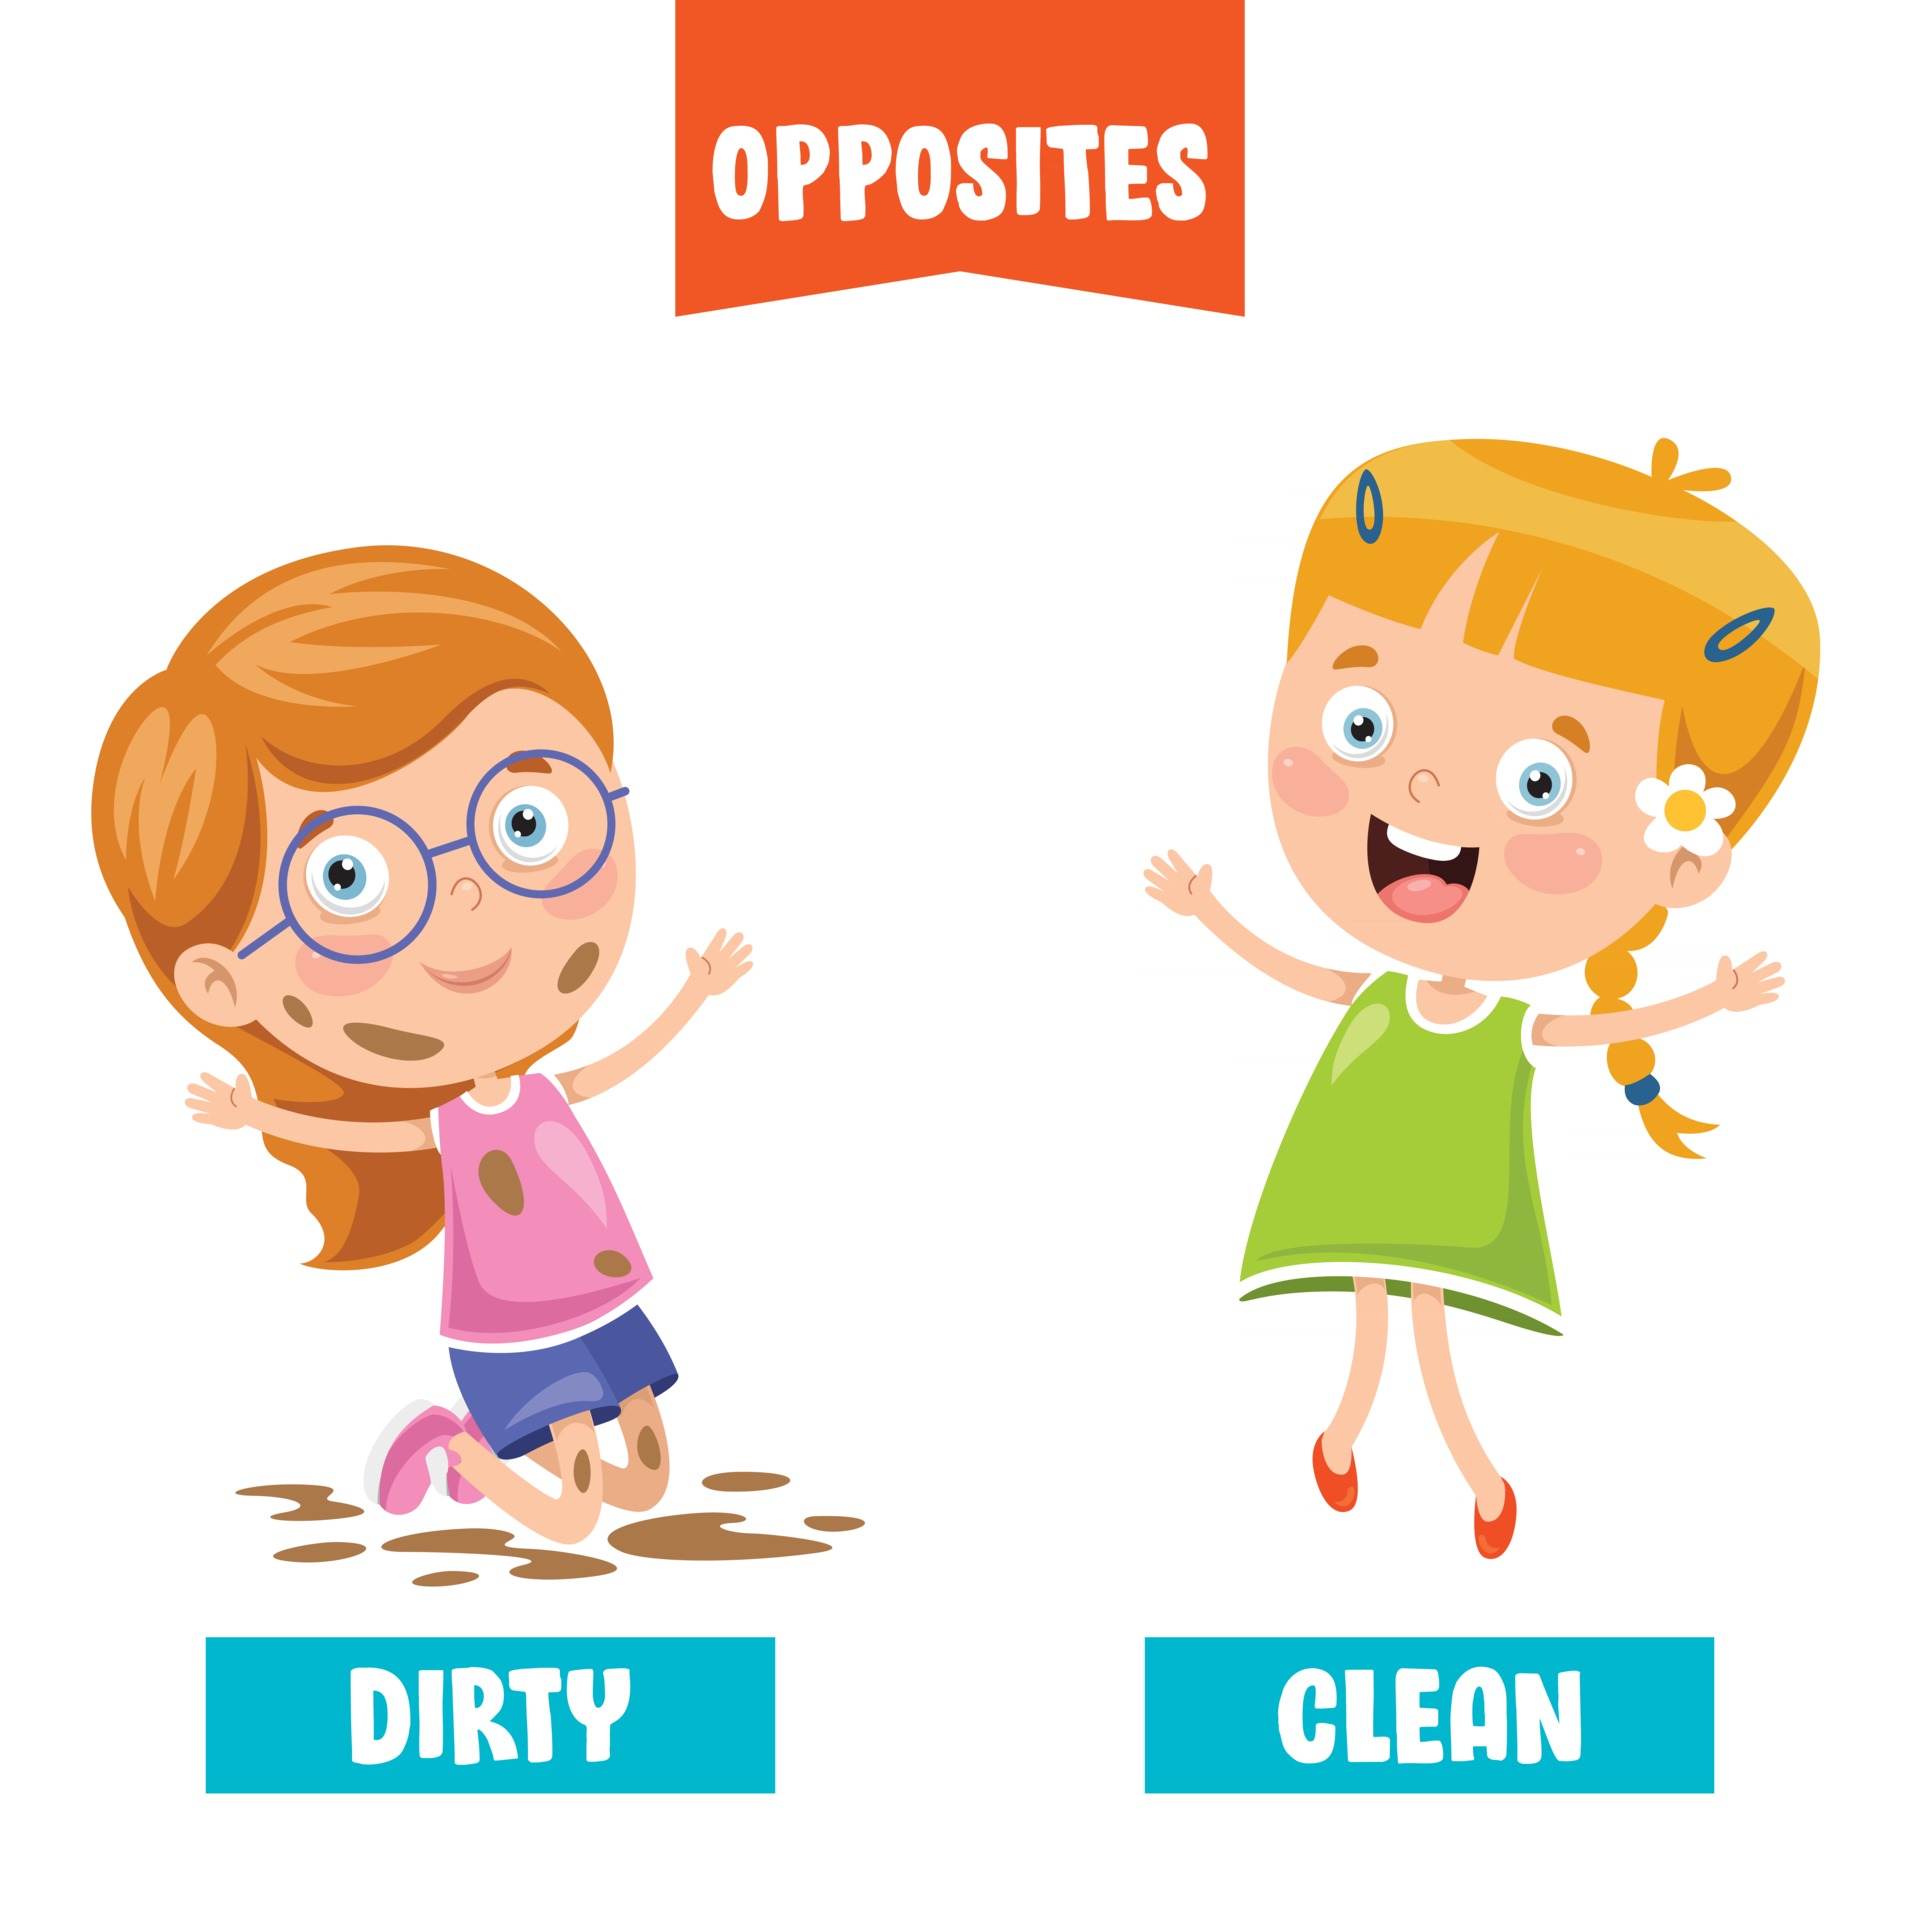 Dirty adjectives. Clean Dirty opposites. Clean and Dirty for Kids. Карточки Dirty clean. Opposites картинки для детей.